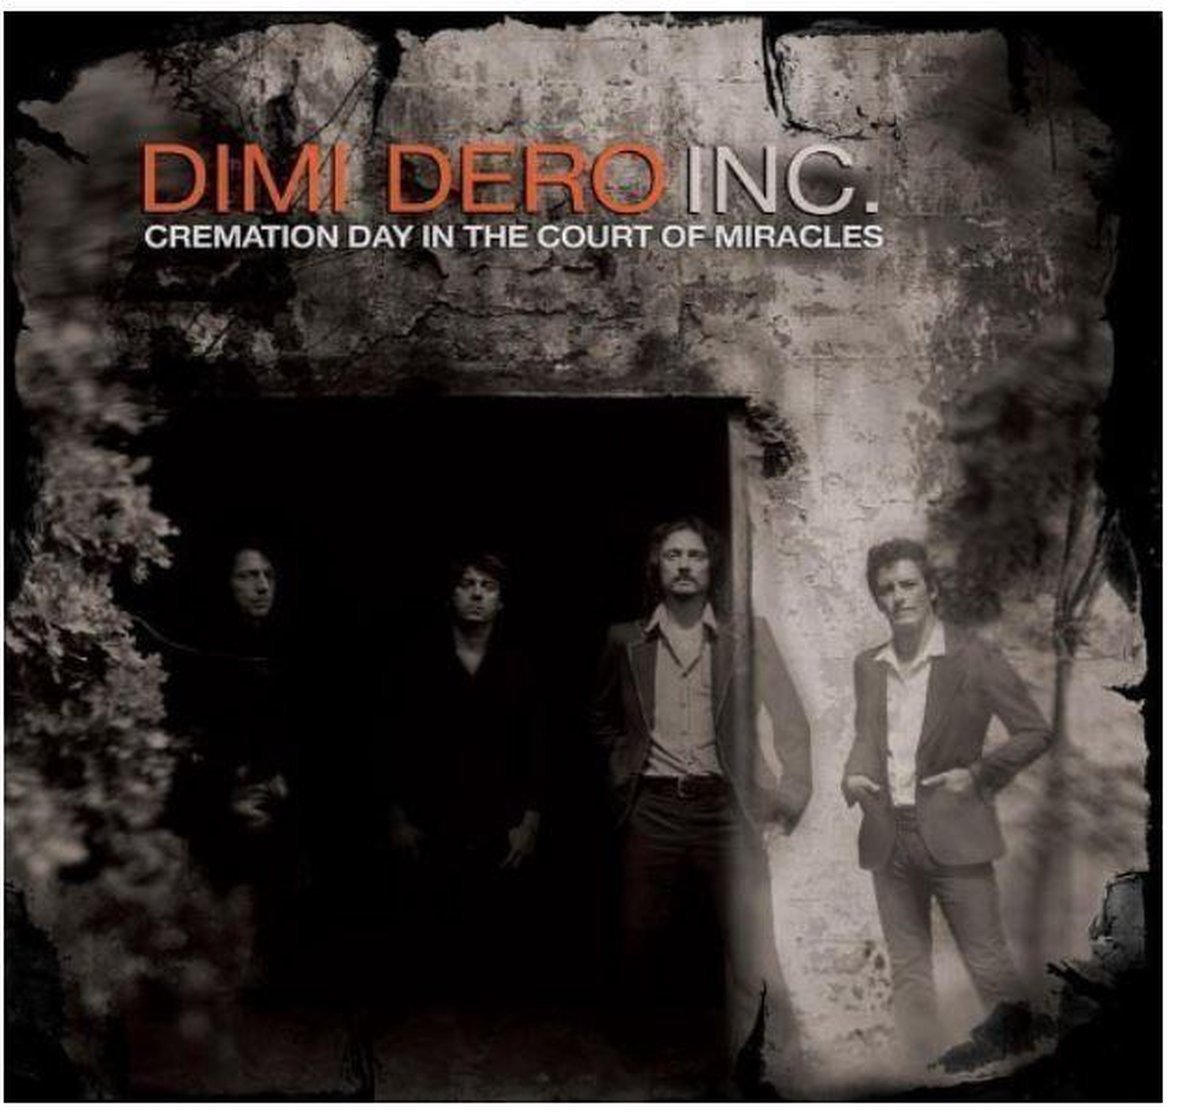 CD Shop - DIMI DERO INC. CREMATION DAY IN THE COURT OF MIRACLES